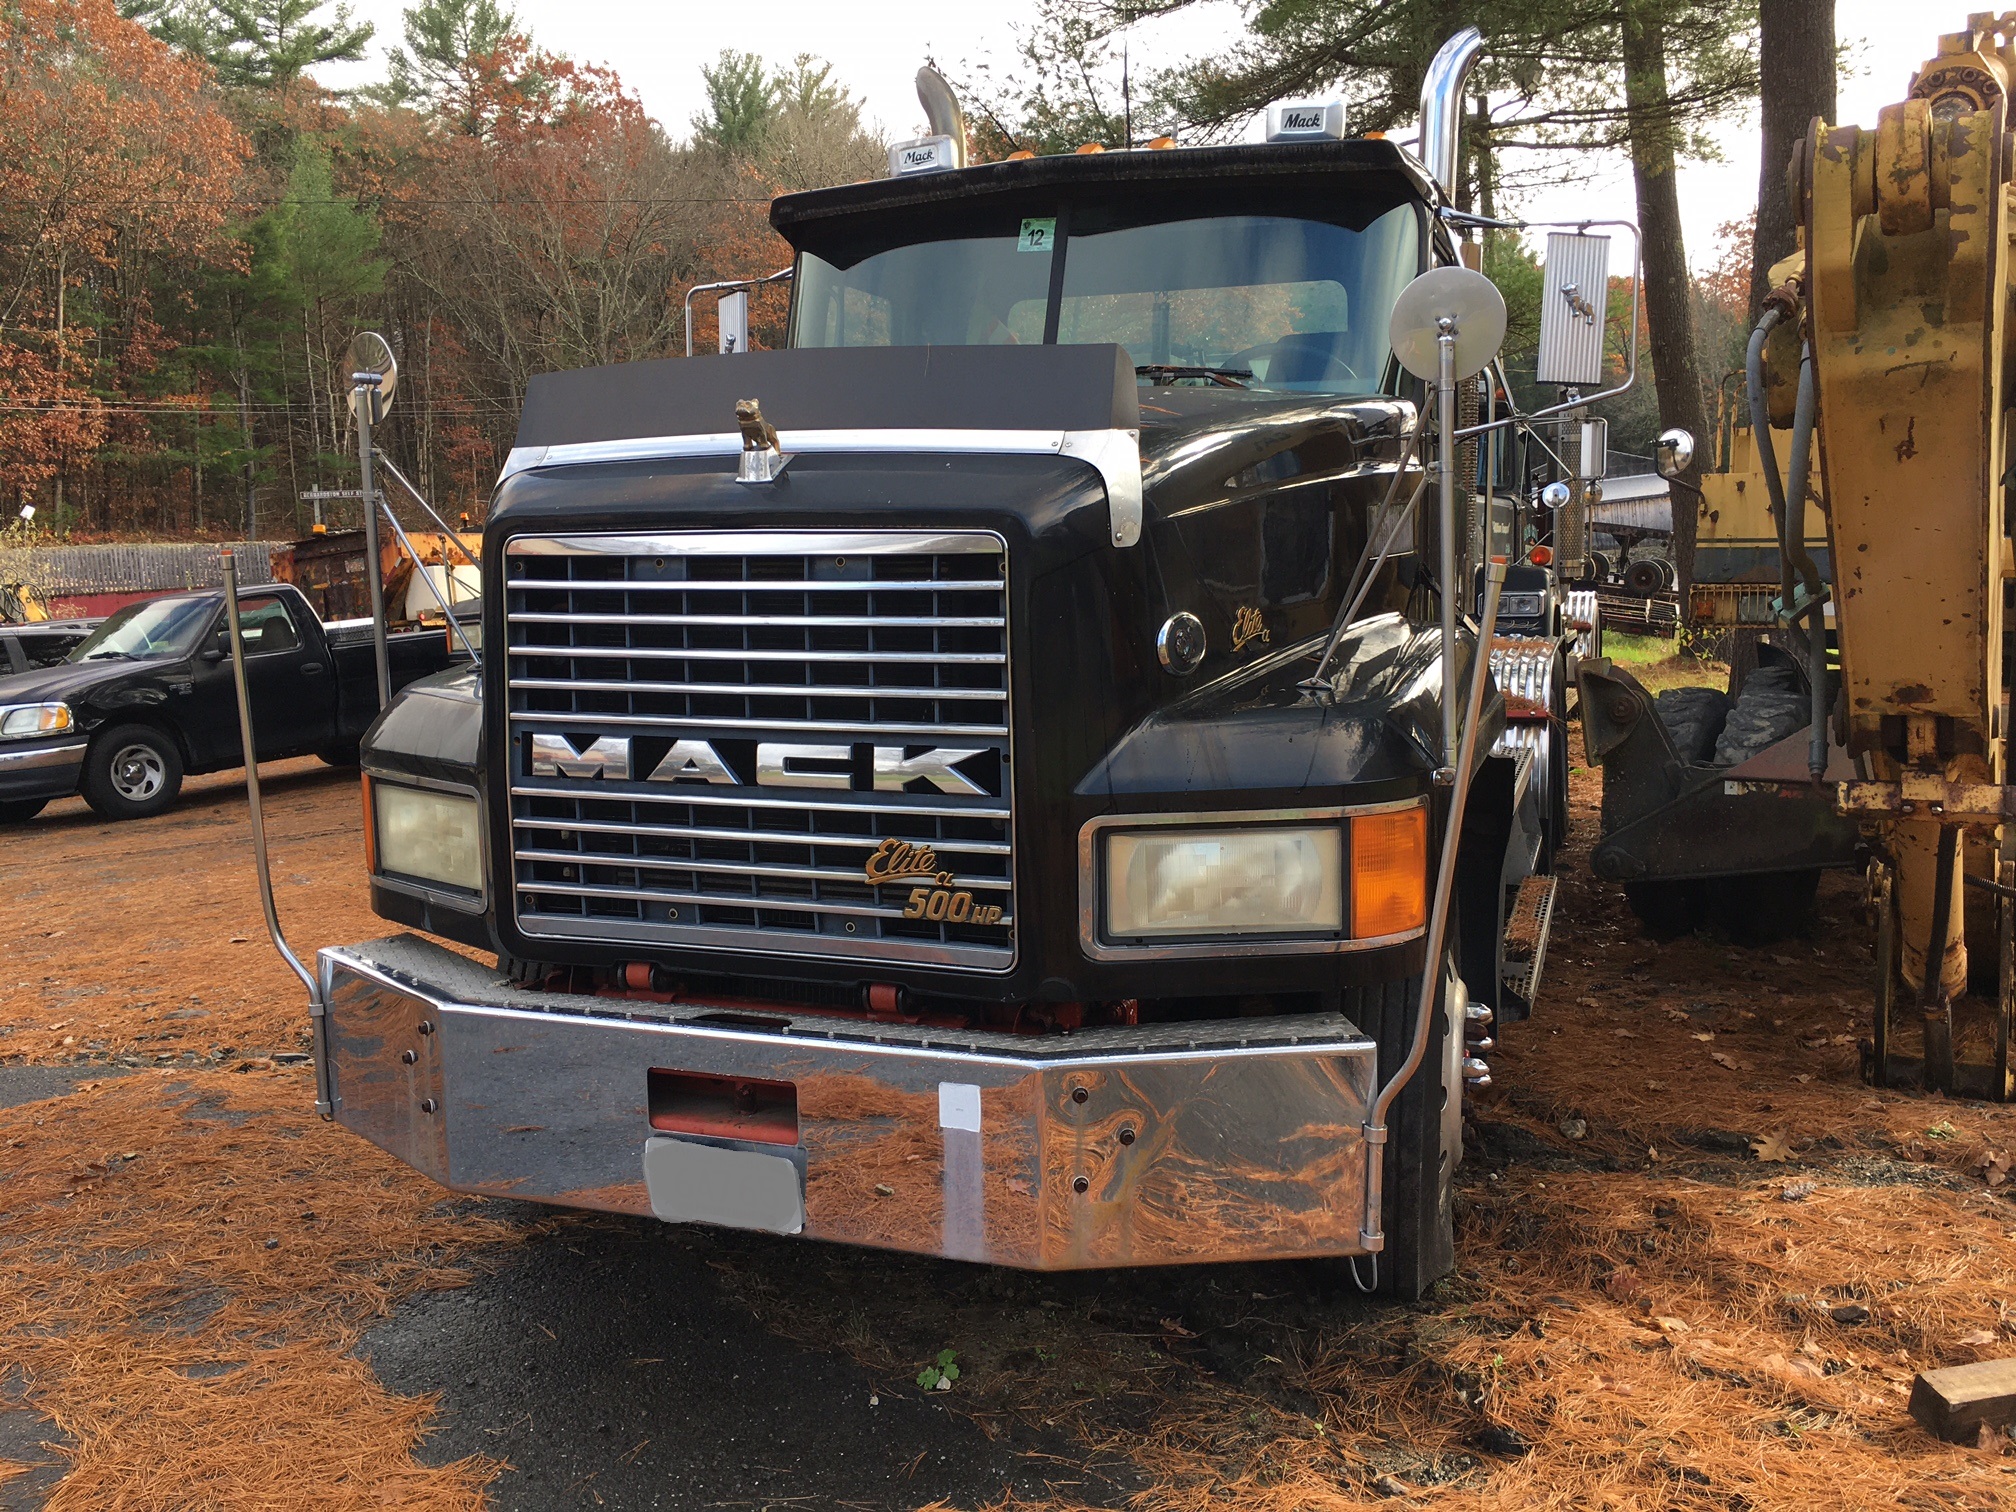 Used Mack truck for sale. Mack CL713 Semi Tractor. 1999 Mack 500 Elite with a 500 horsepower V8 diesel engine and 463015 miles. Maxitorque extended range 12 speed splitter transmission. 46k lbs. rears. Double frame. PTO and Wetline set up. Room for drop axle. Updated newer driver's cab. Engine break. Air ride drivers seat and A/C